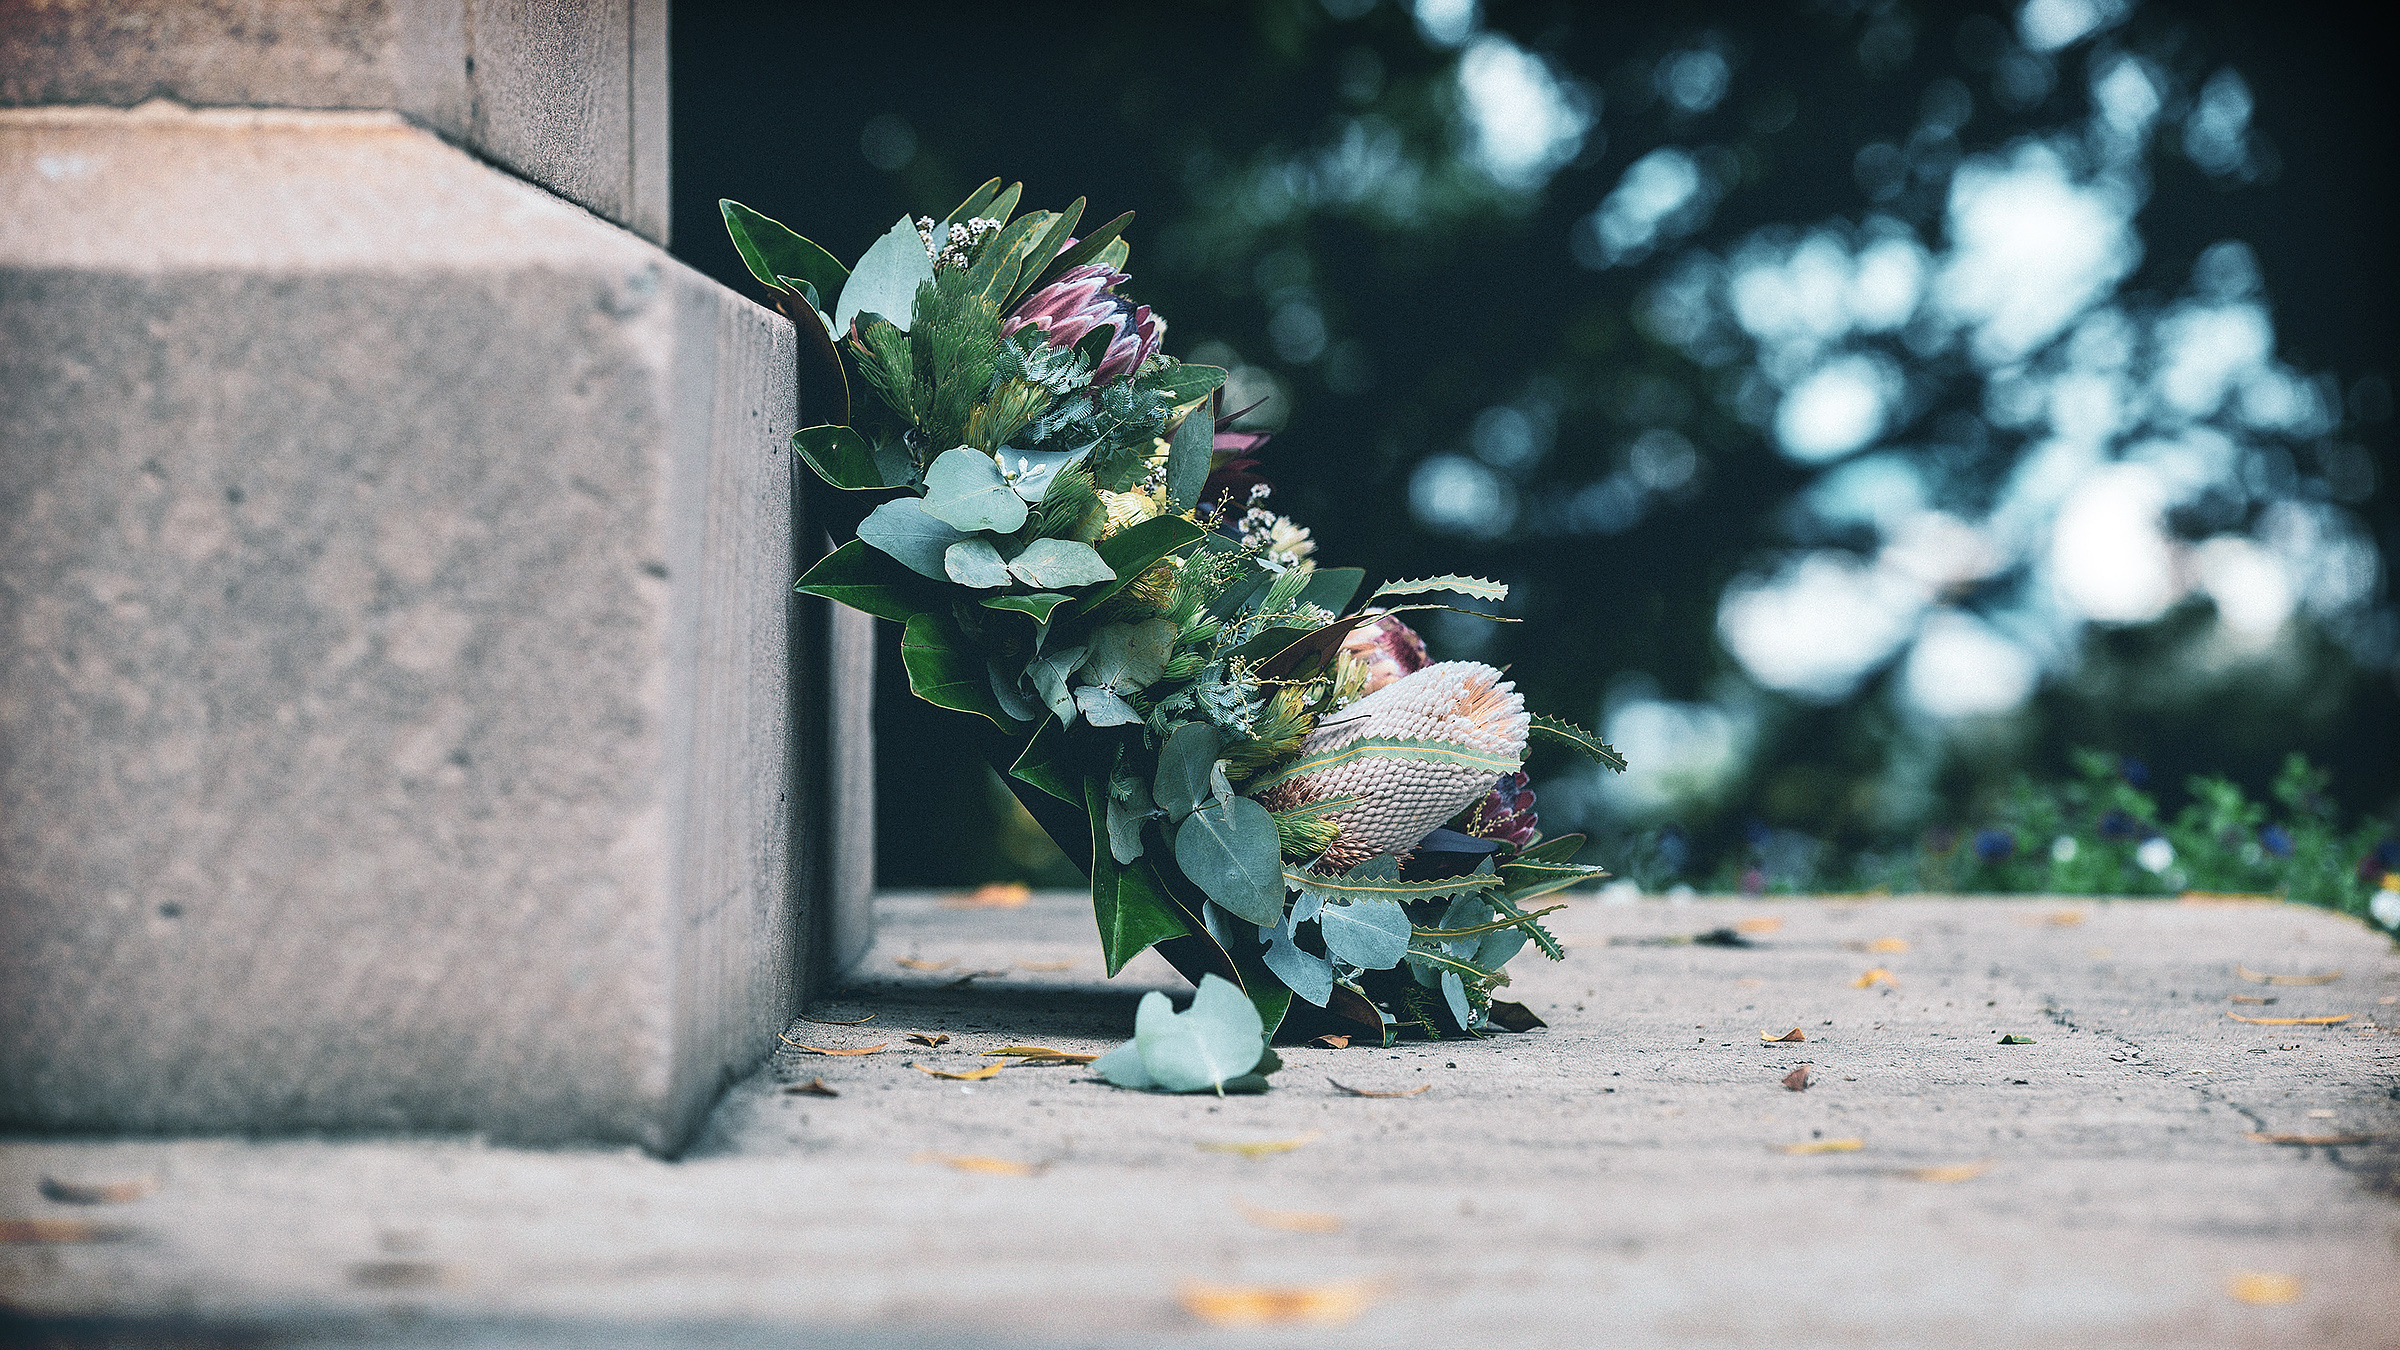 Wreath on a grave as a visual metaphor for an expired domain